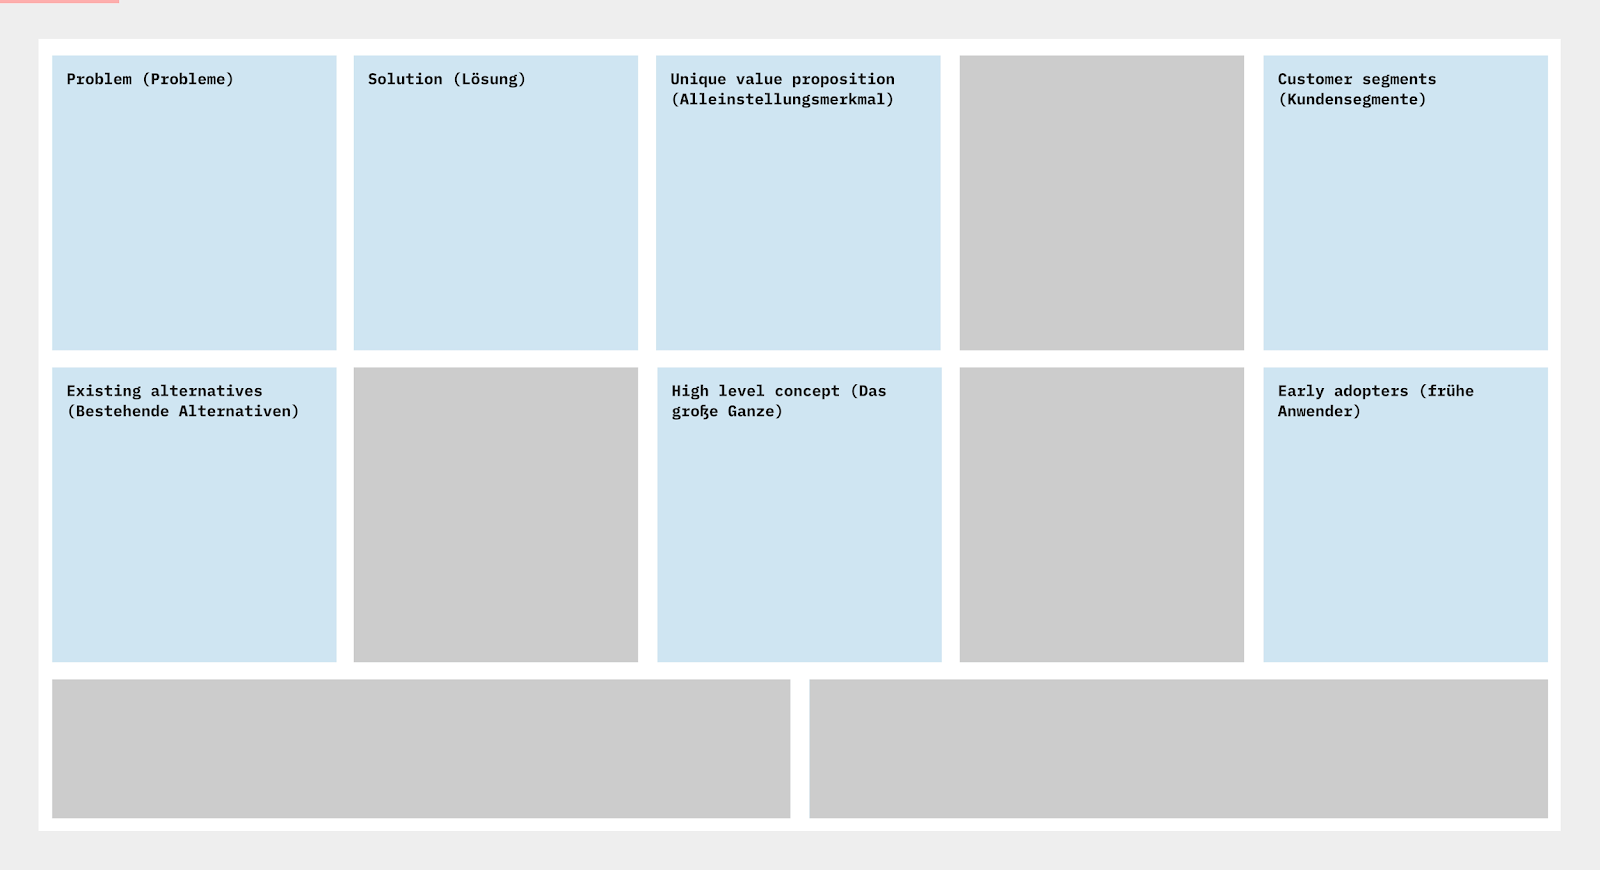 Chart, treemap chart

Description automatically generated